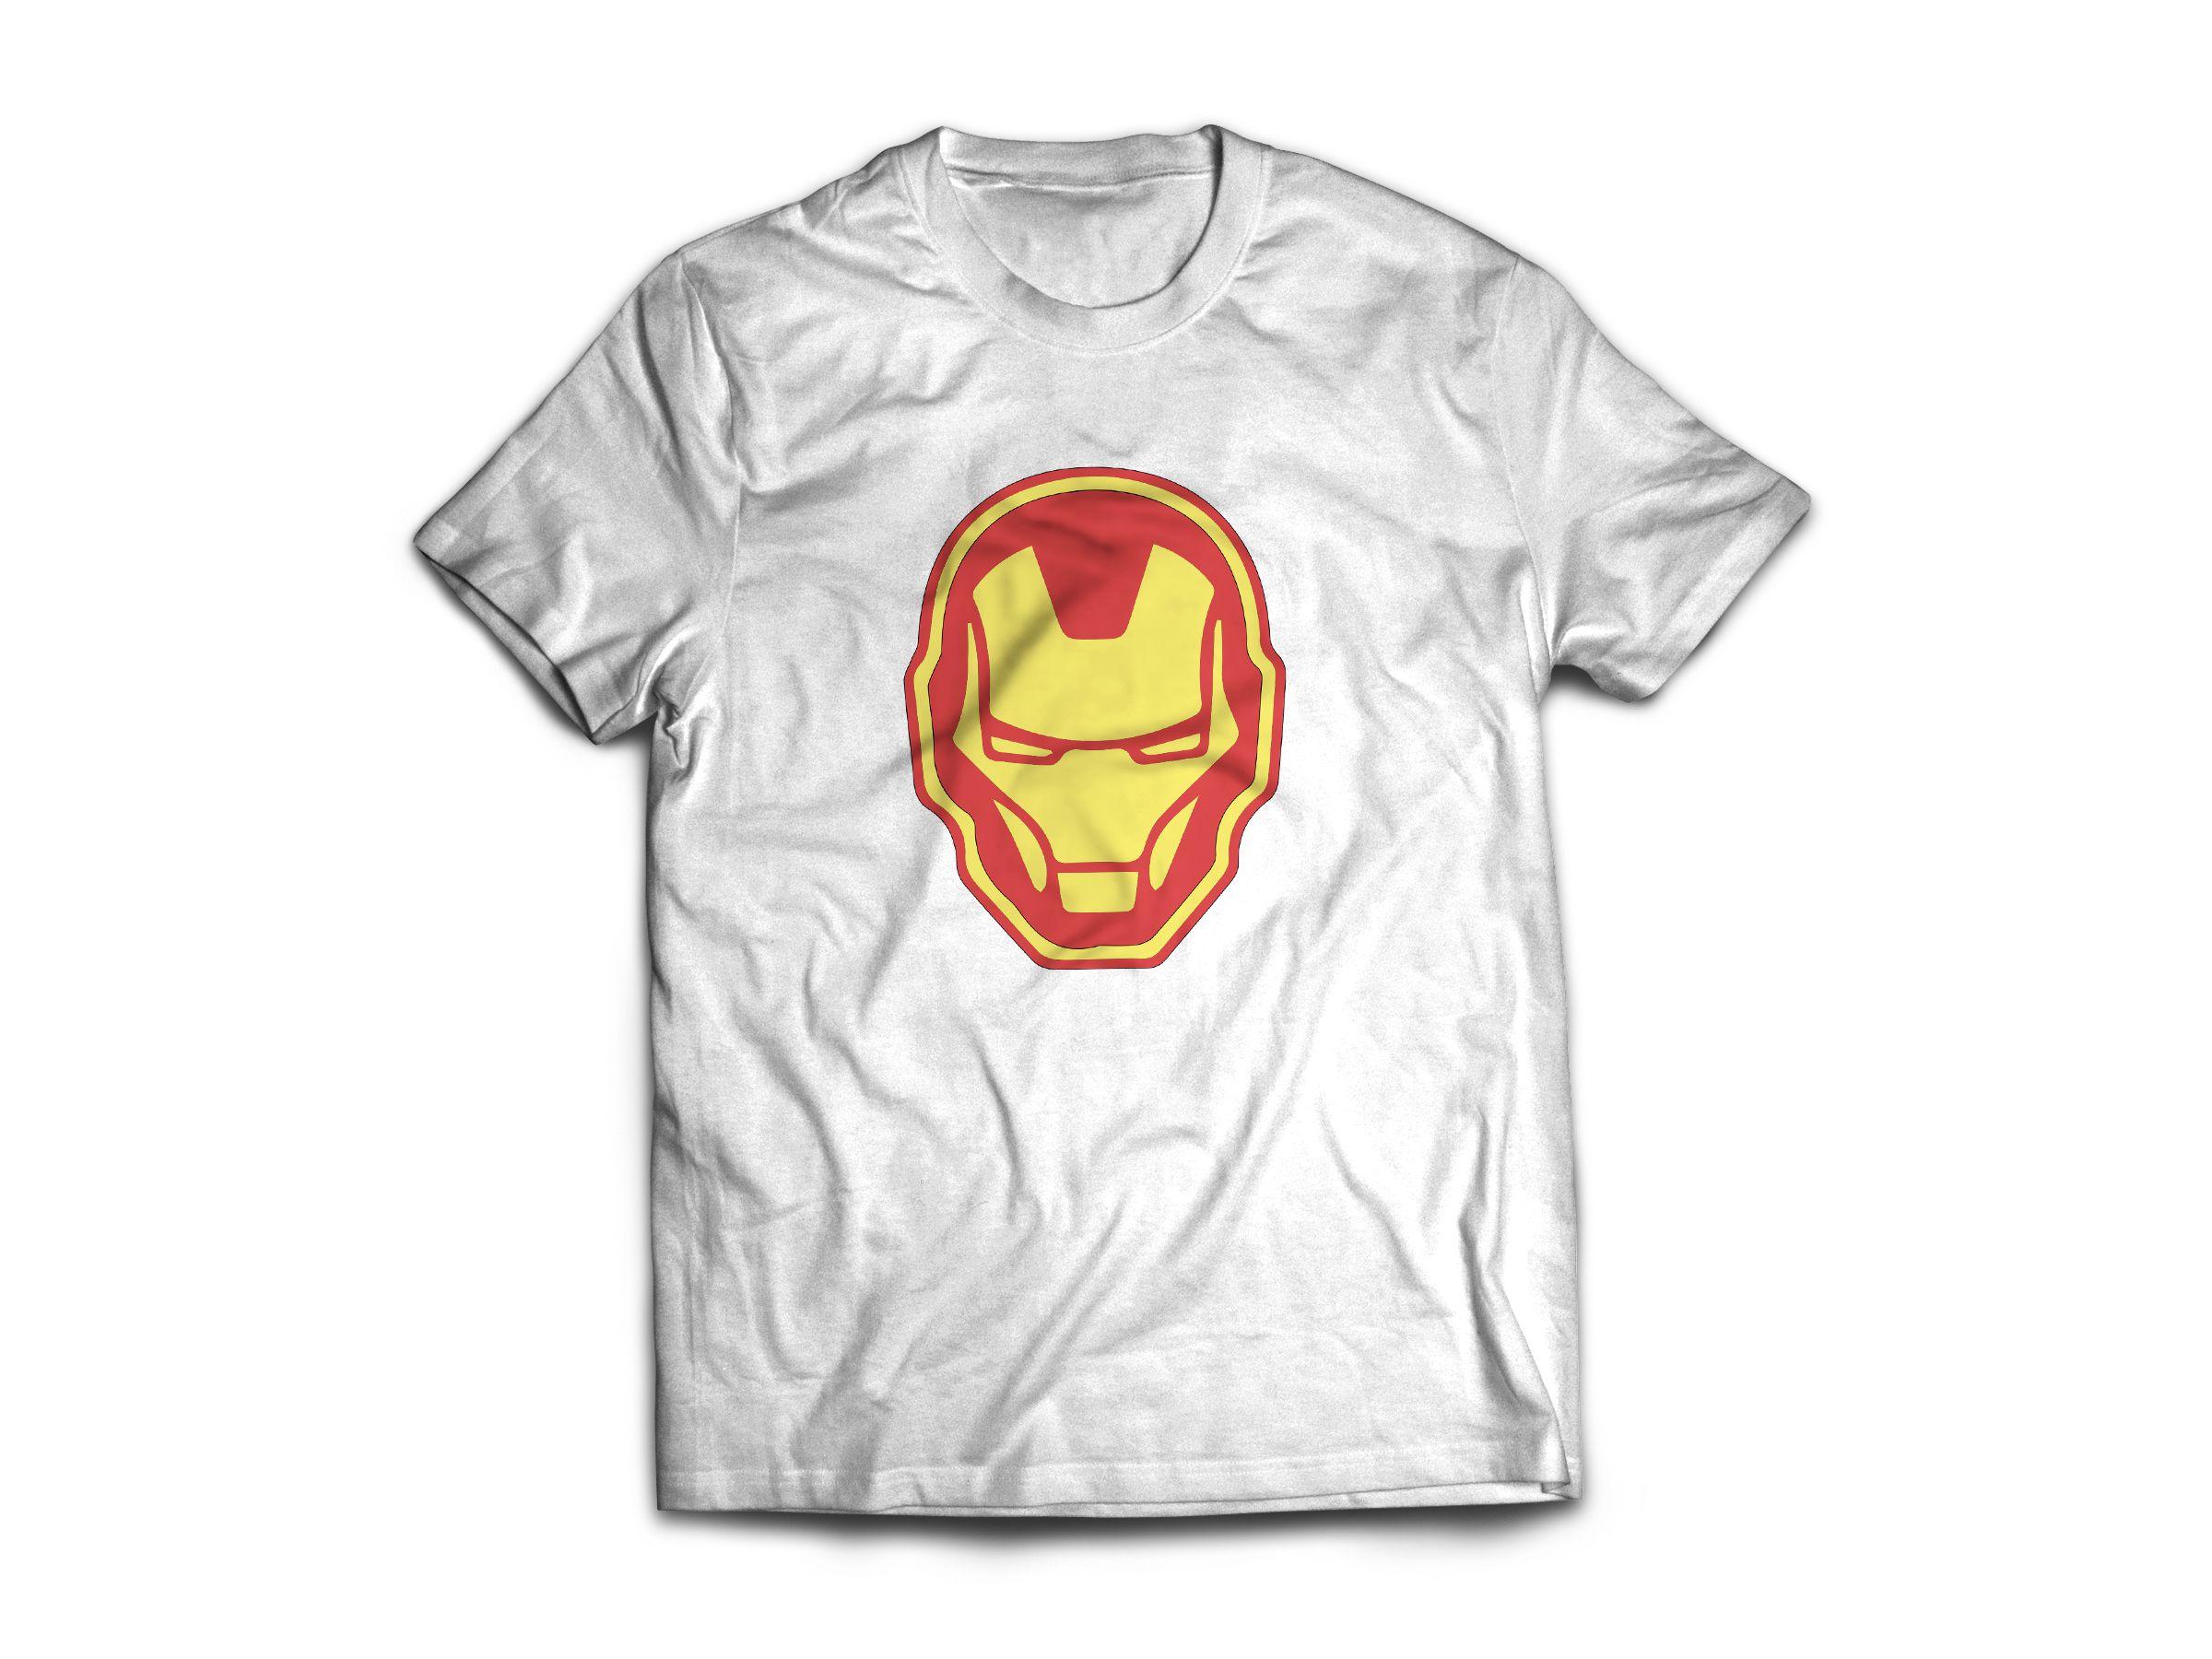 Red White Blue Face Logo - Iron Man Red And Yellow Face Logo T Shirt. The Custom Shop